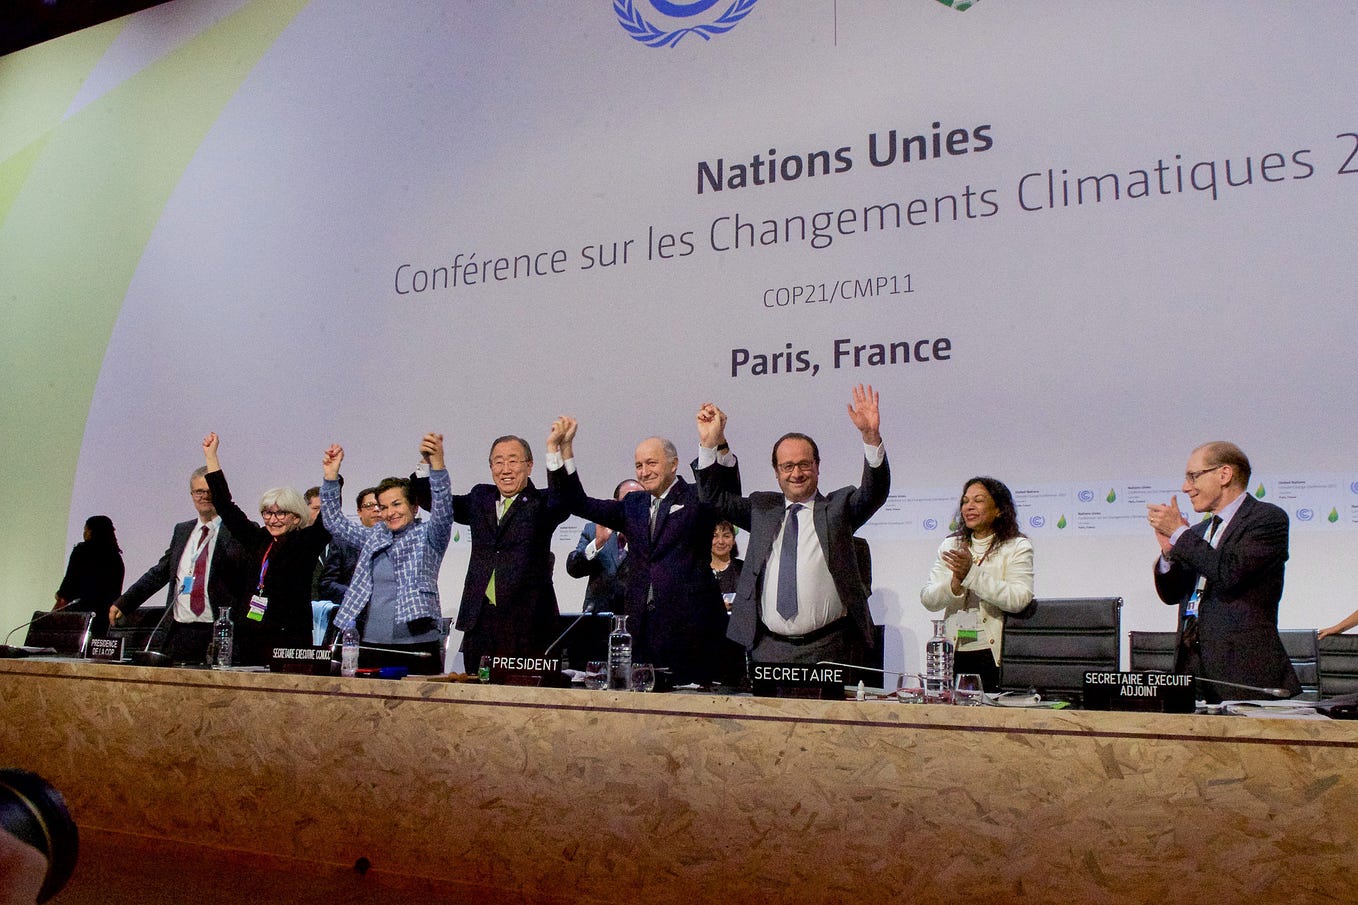 5 Reasons Why the Paris Agreement is a Joke (and How We Can Fix It)